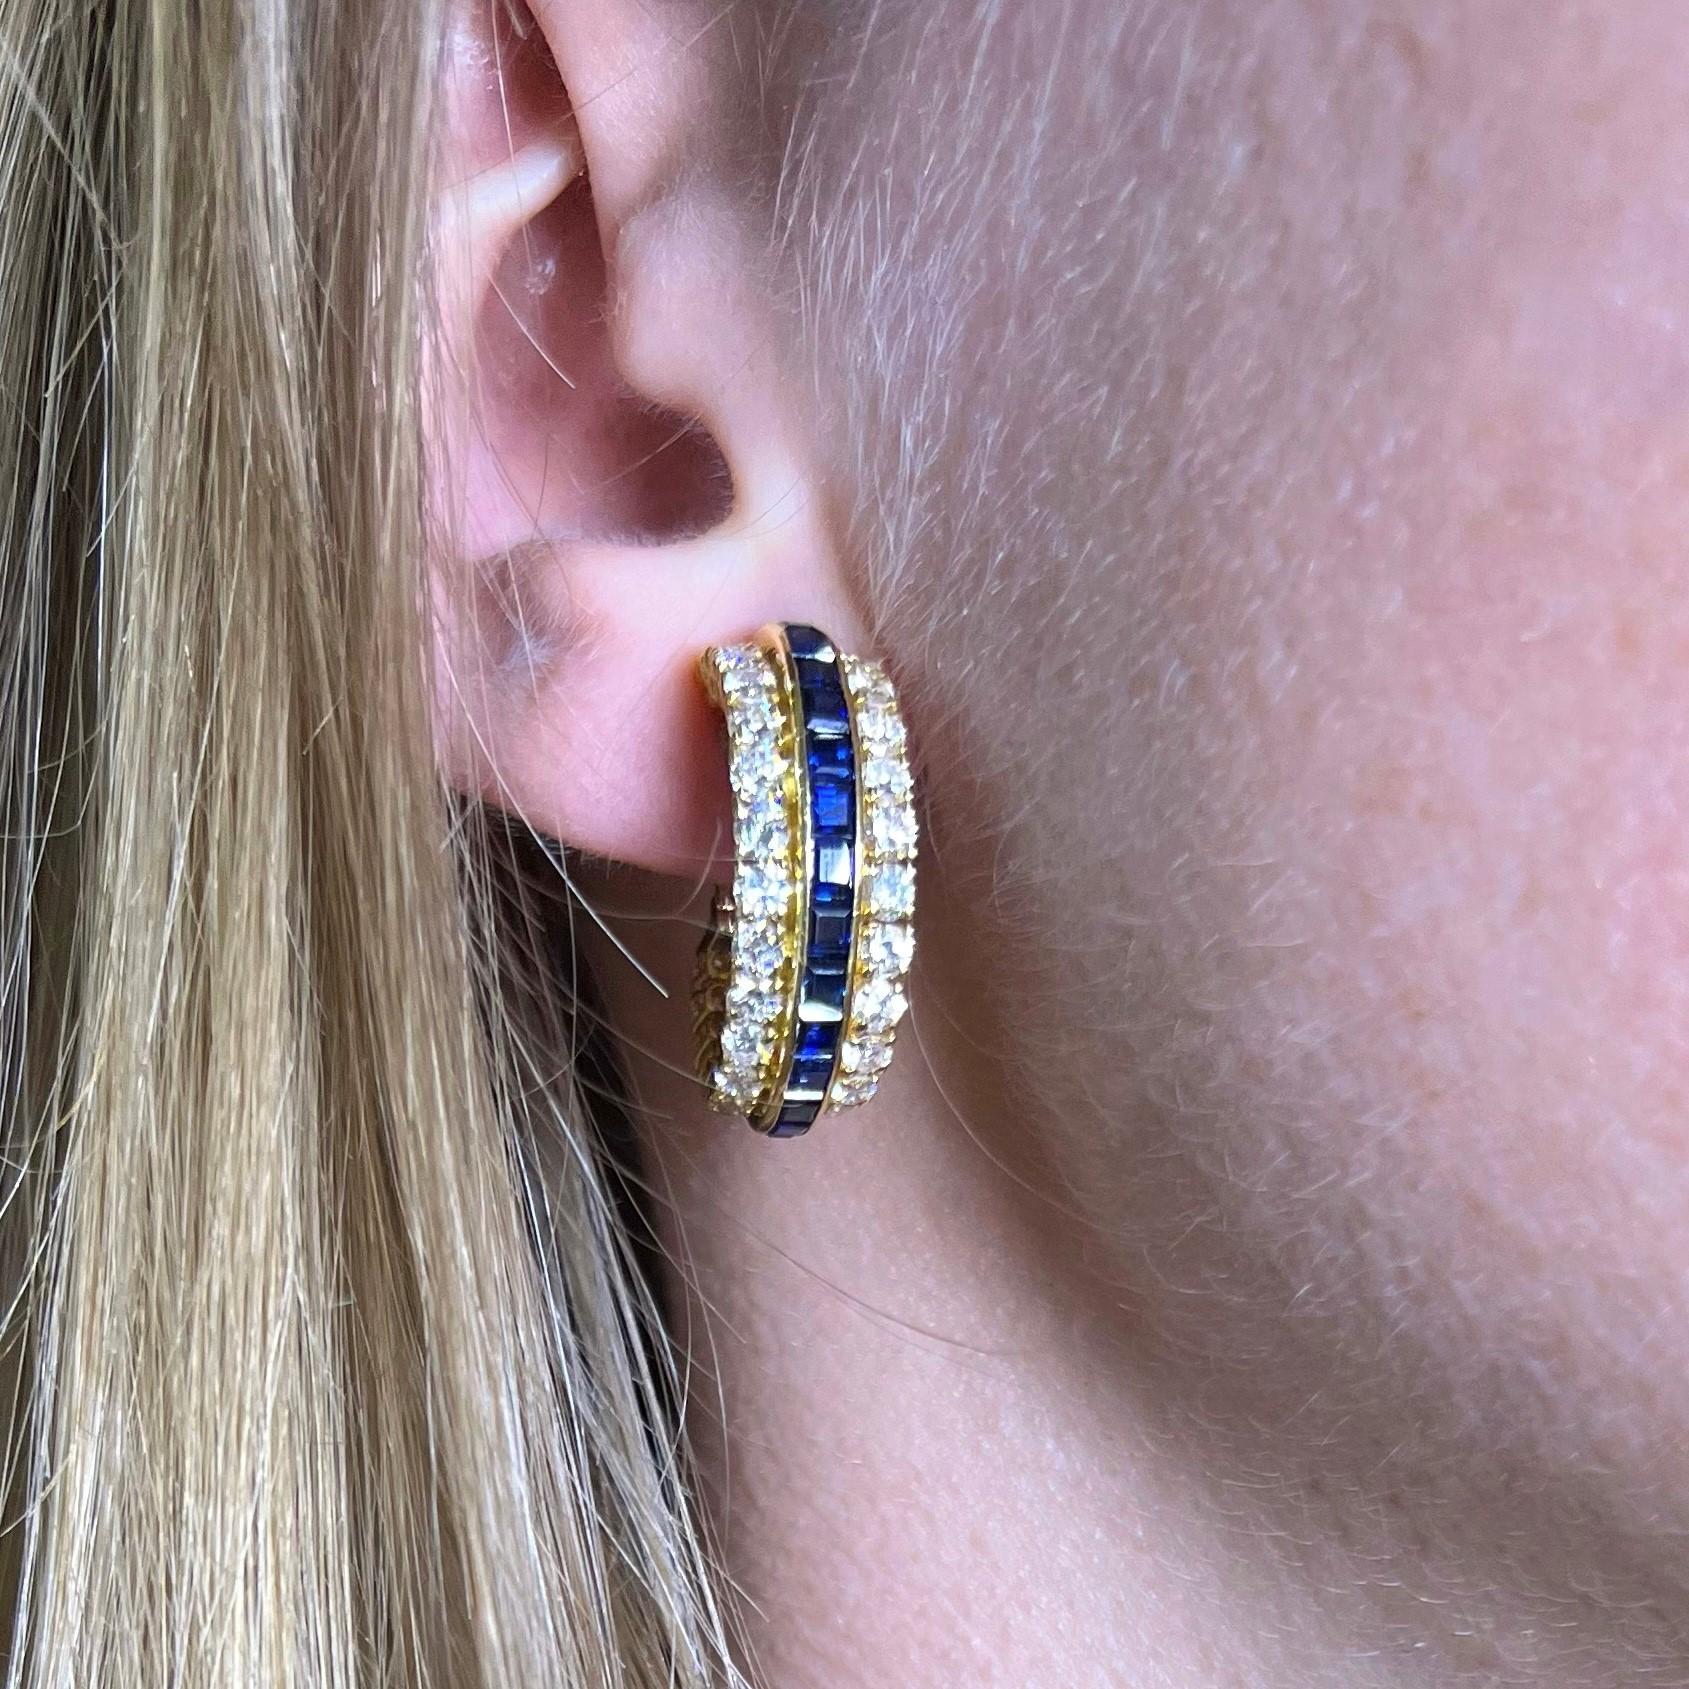 Brilliant Cut Elegant Van Cleef & Arpels Earclips in 18K Gold with Sapphires and Diamonds